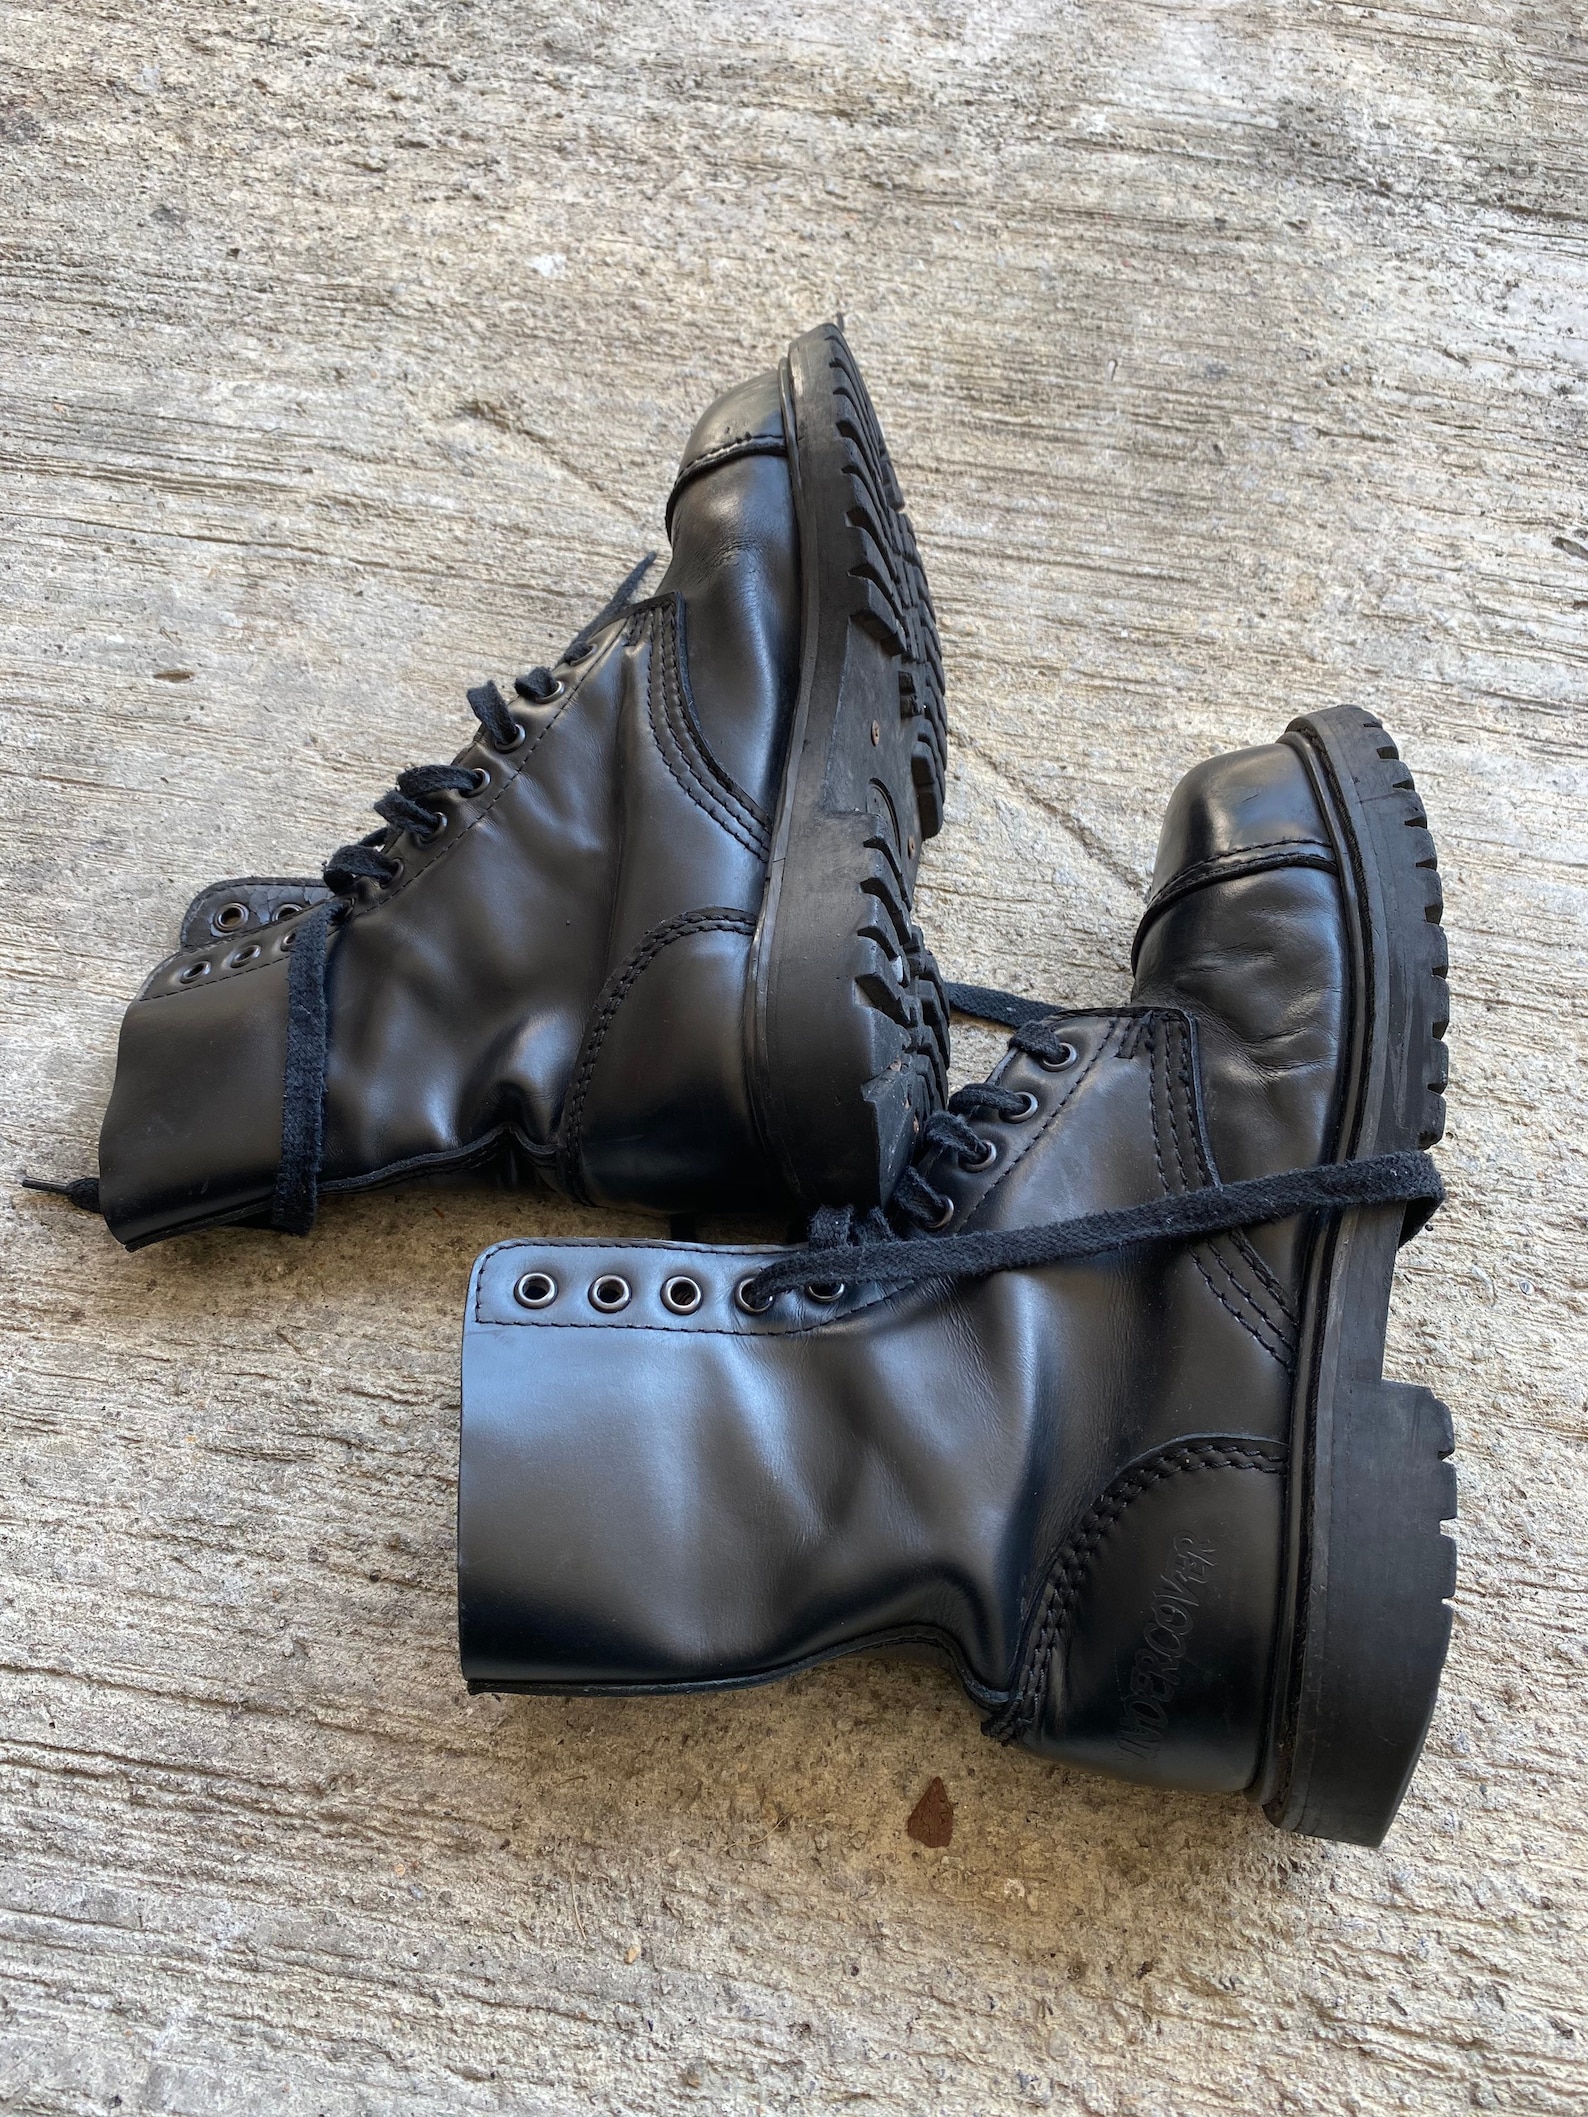 Undercover Combat Boots Black Steel Toe Size 7 | Etsy